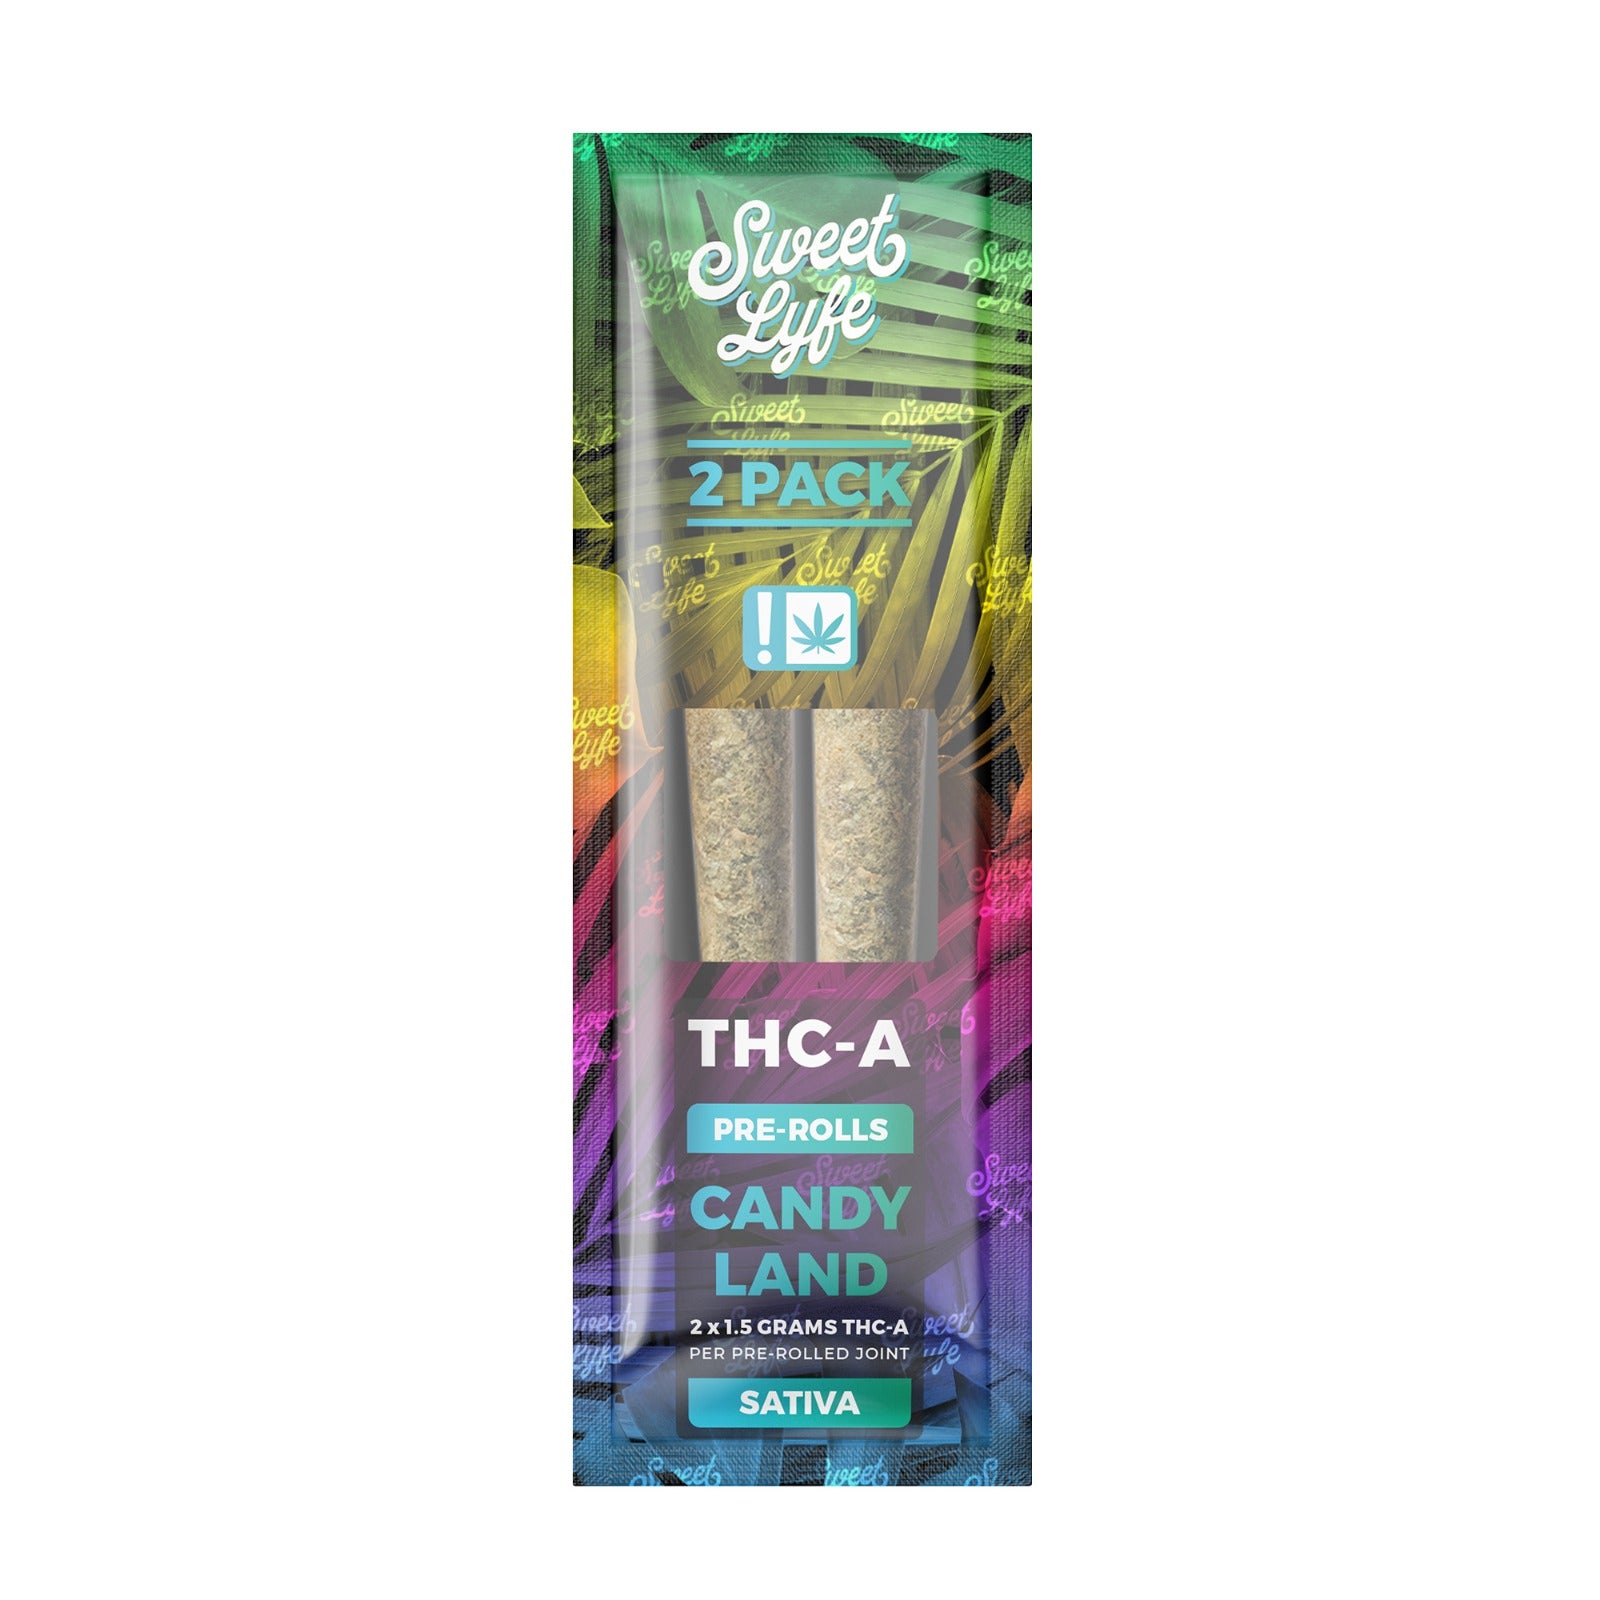 2 Pack Pre-Rolls Joint THC-A|Candy Land- Sativa